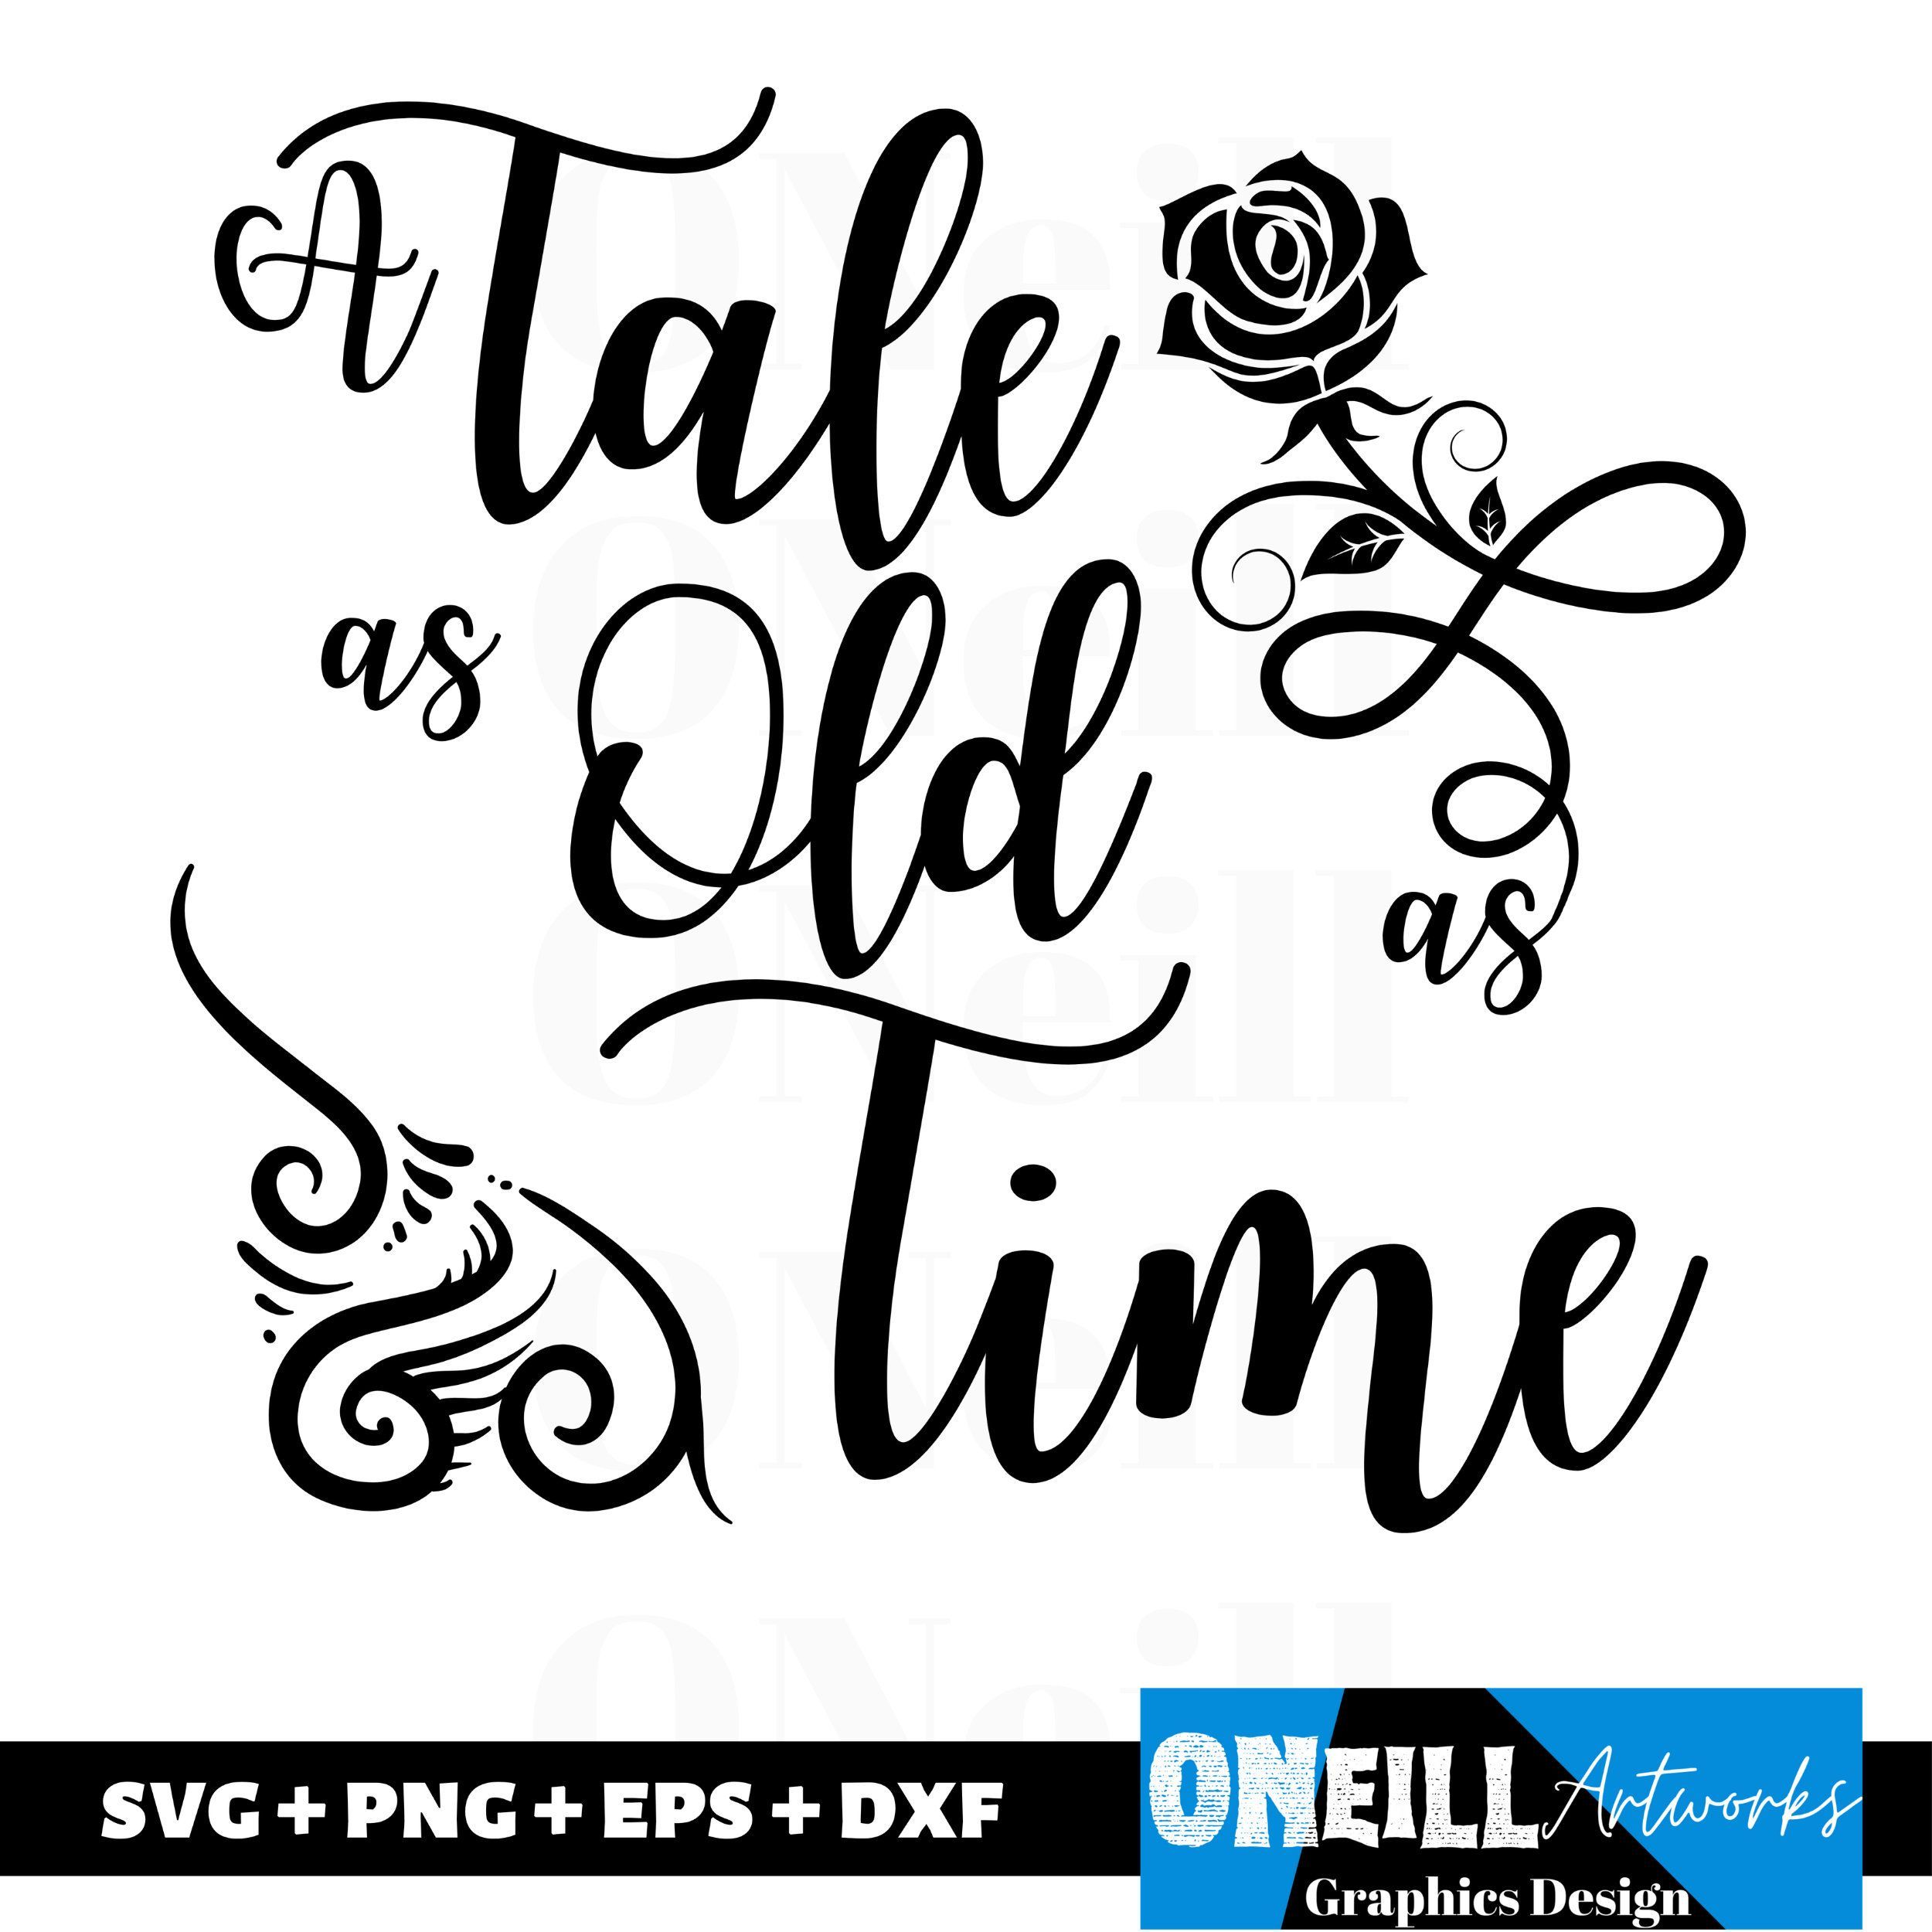 Beauty and the Beast quote svg png eps and dxf disney party digital download decal, sticker and more -   23 beauty And The Beast svg ideas